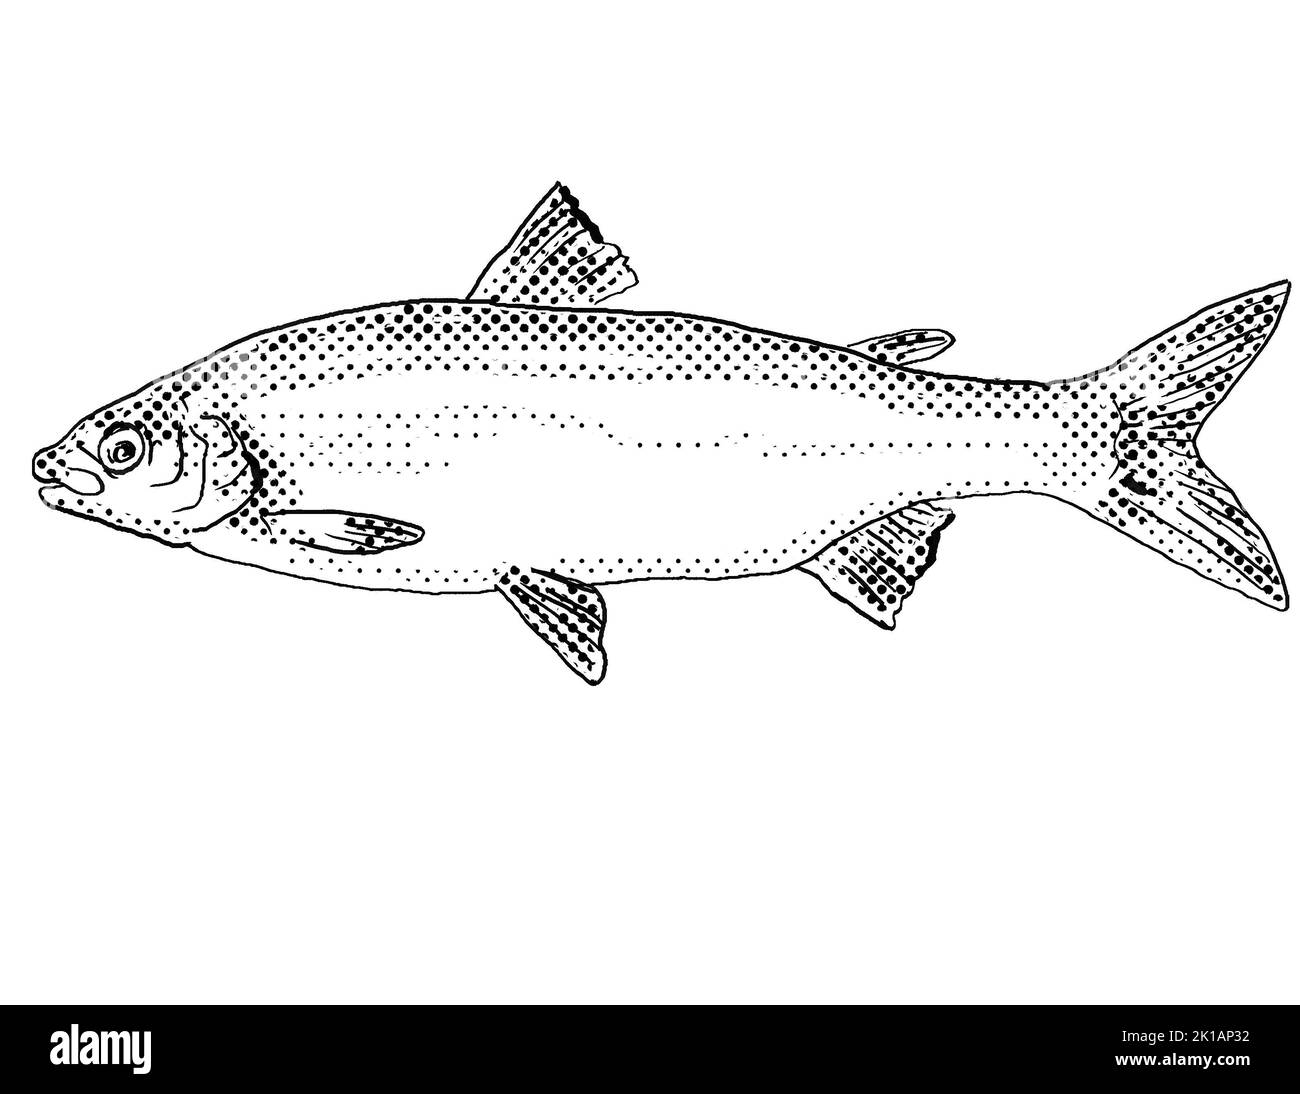 Cartoon style line drawing of a lake whitefish or Coregonus clupeaformis a freshwater fish endemic to North America with halftone dots shading on isol Stock Photo